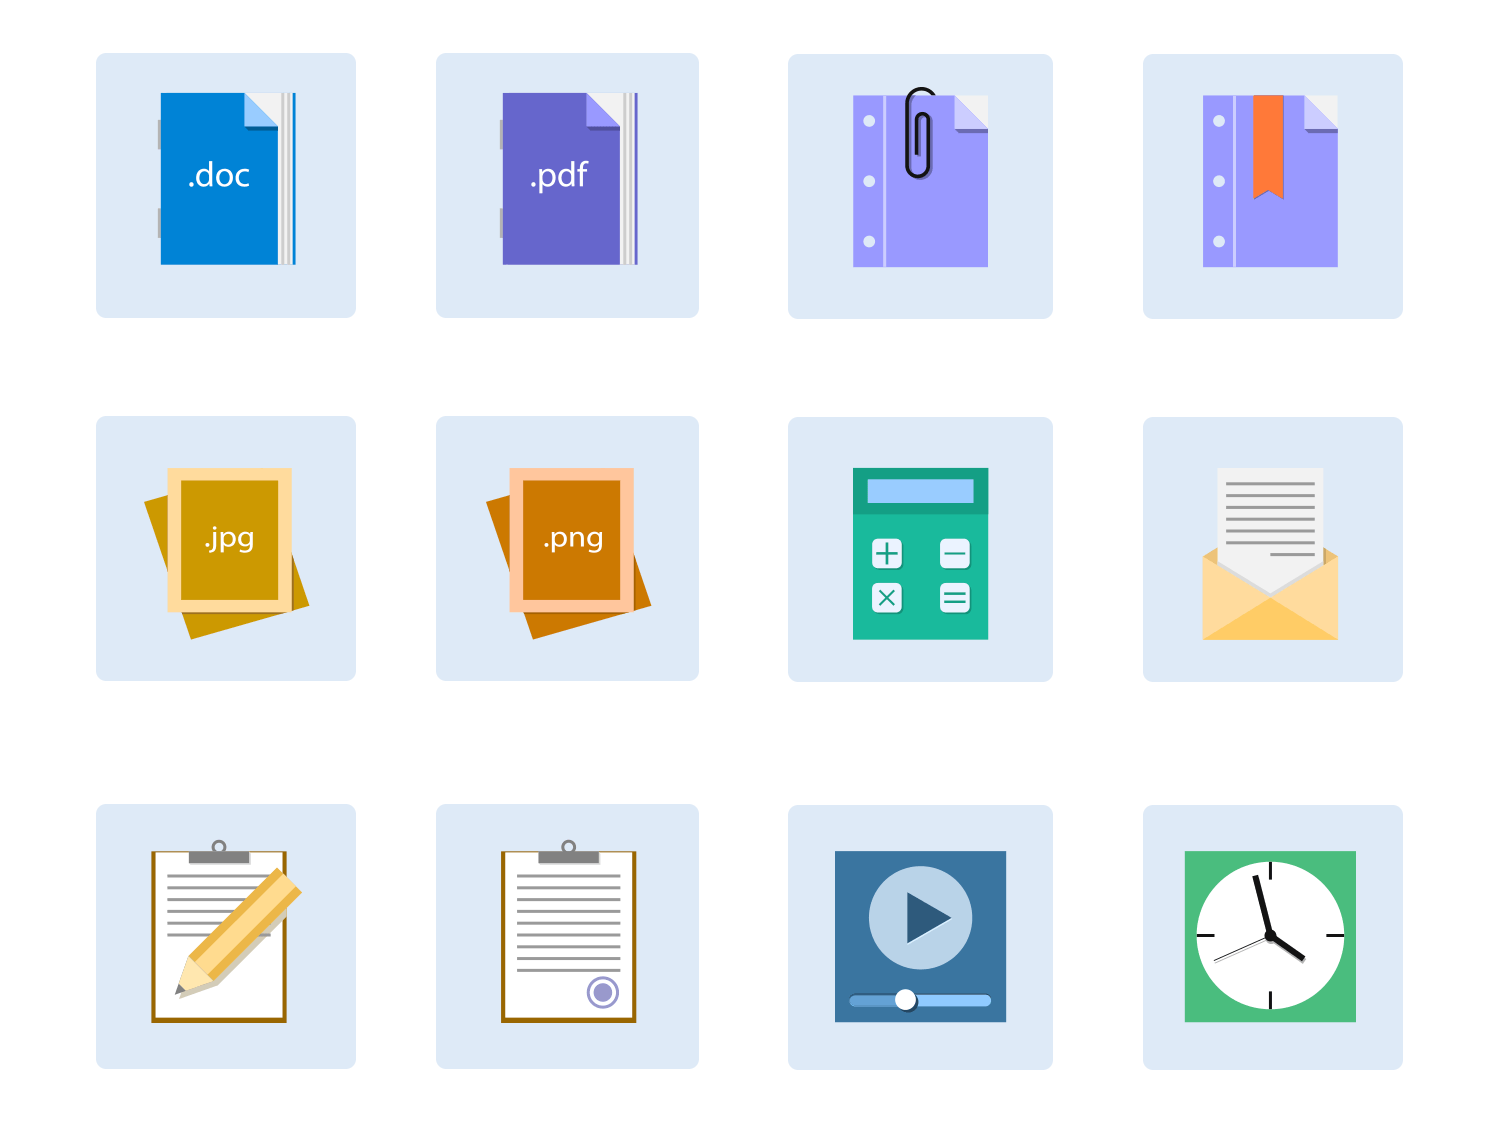 card-ui-design - cards are great for organizing different kinds of media files